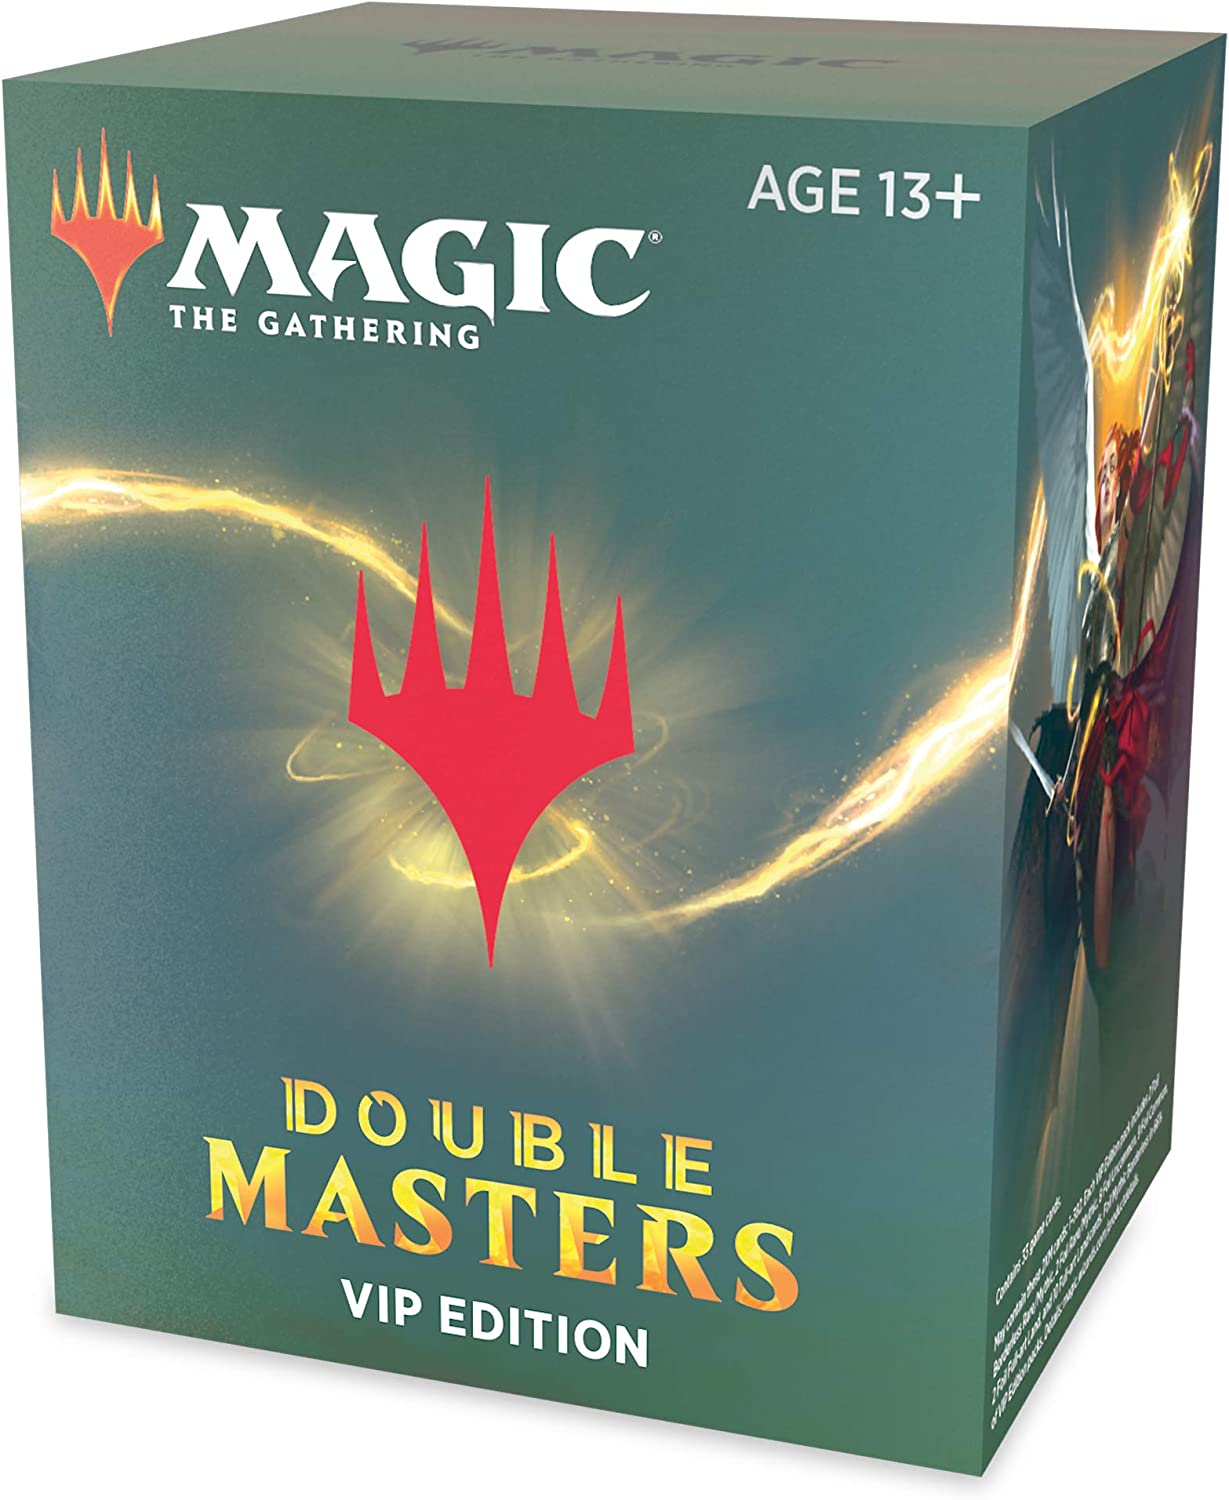 Magic The Gathering: Double Masters 2020 VIP Pack, Wizards of the Coast, Magic the Gathering Sealed, magic-the-gathering-double-masters-2020-vip-booster-pack, Double Masters, MTG Sealed, New Arrival, Dark Ninja Gaming LA